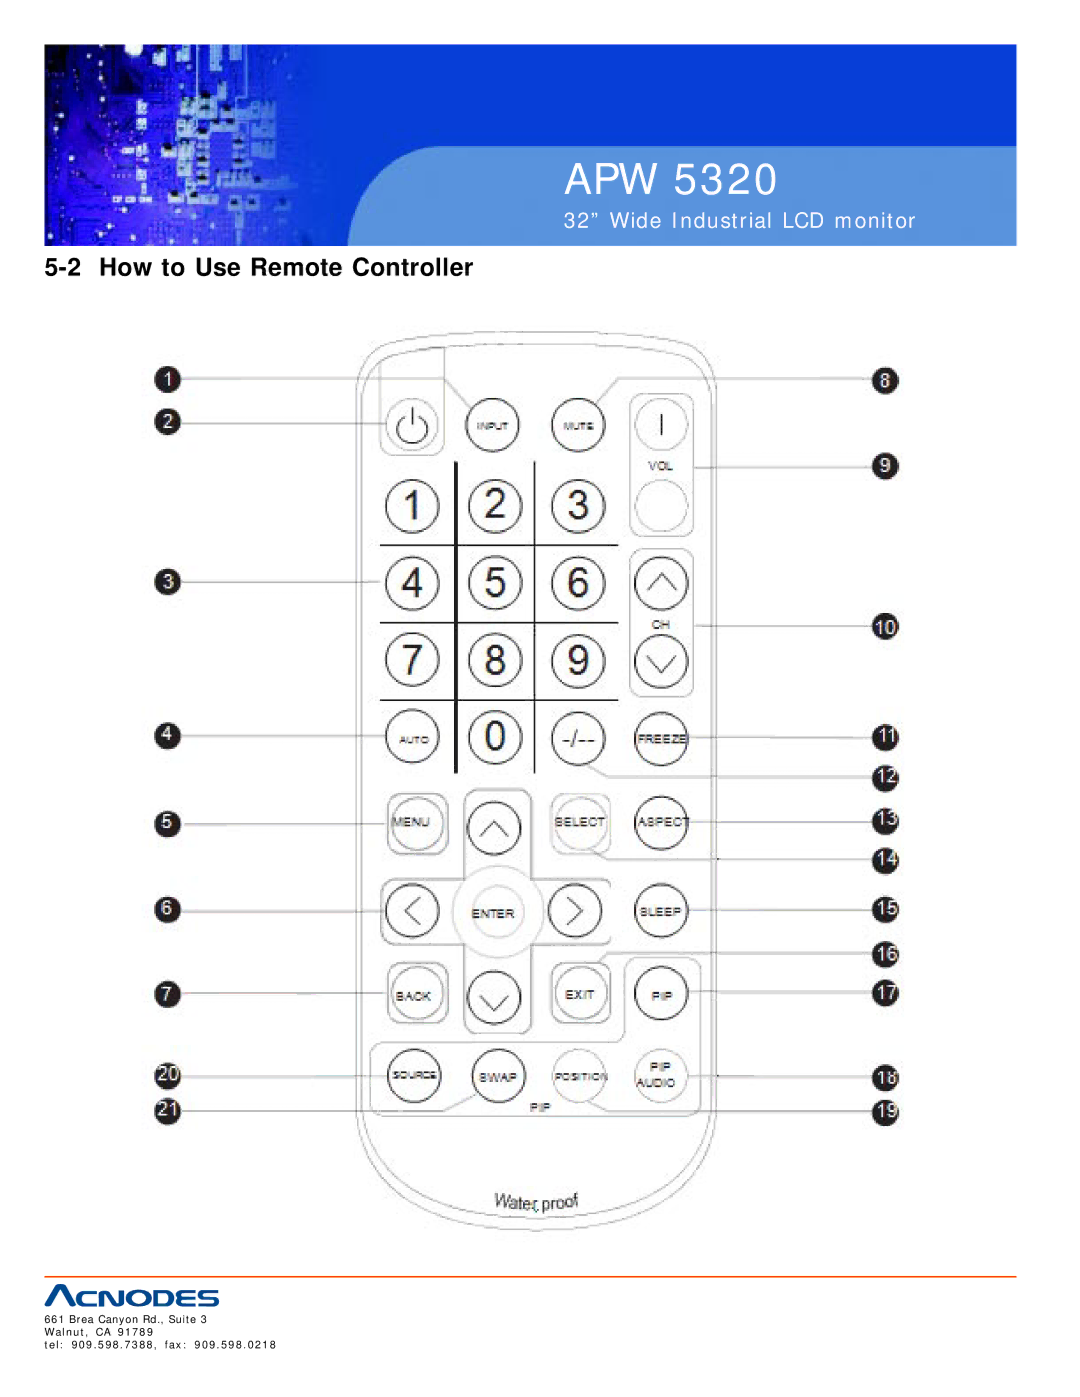 Acnodes APW 5320 user manual How to Use Remote Controller 